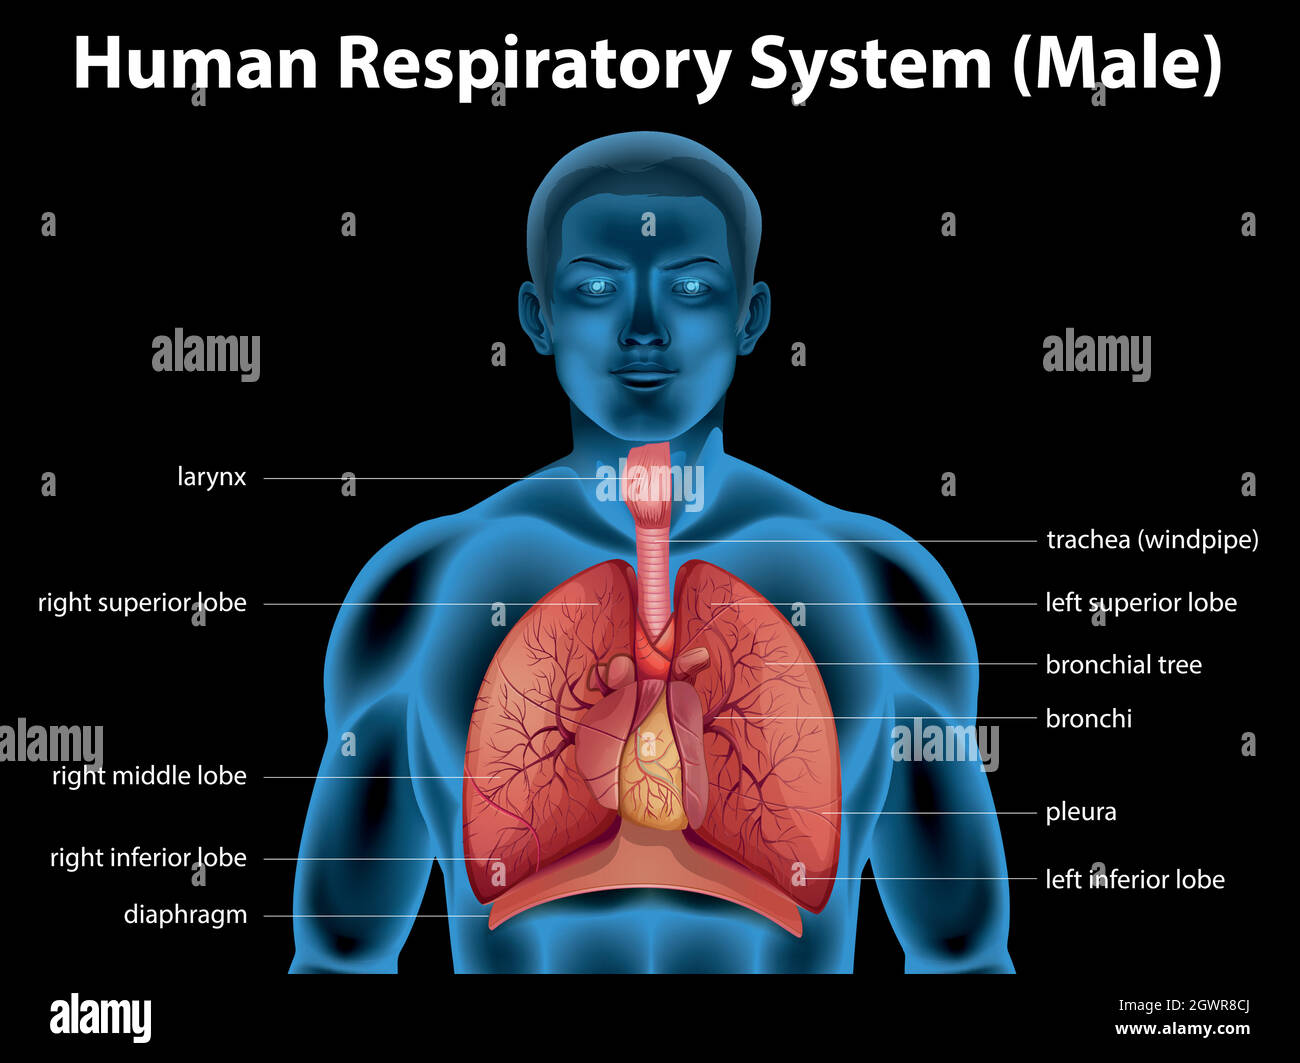 diagram of the respiratory system and functions